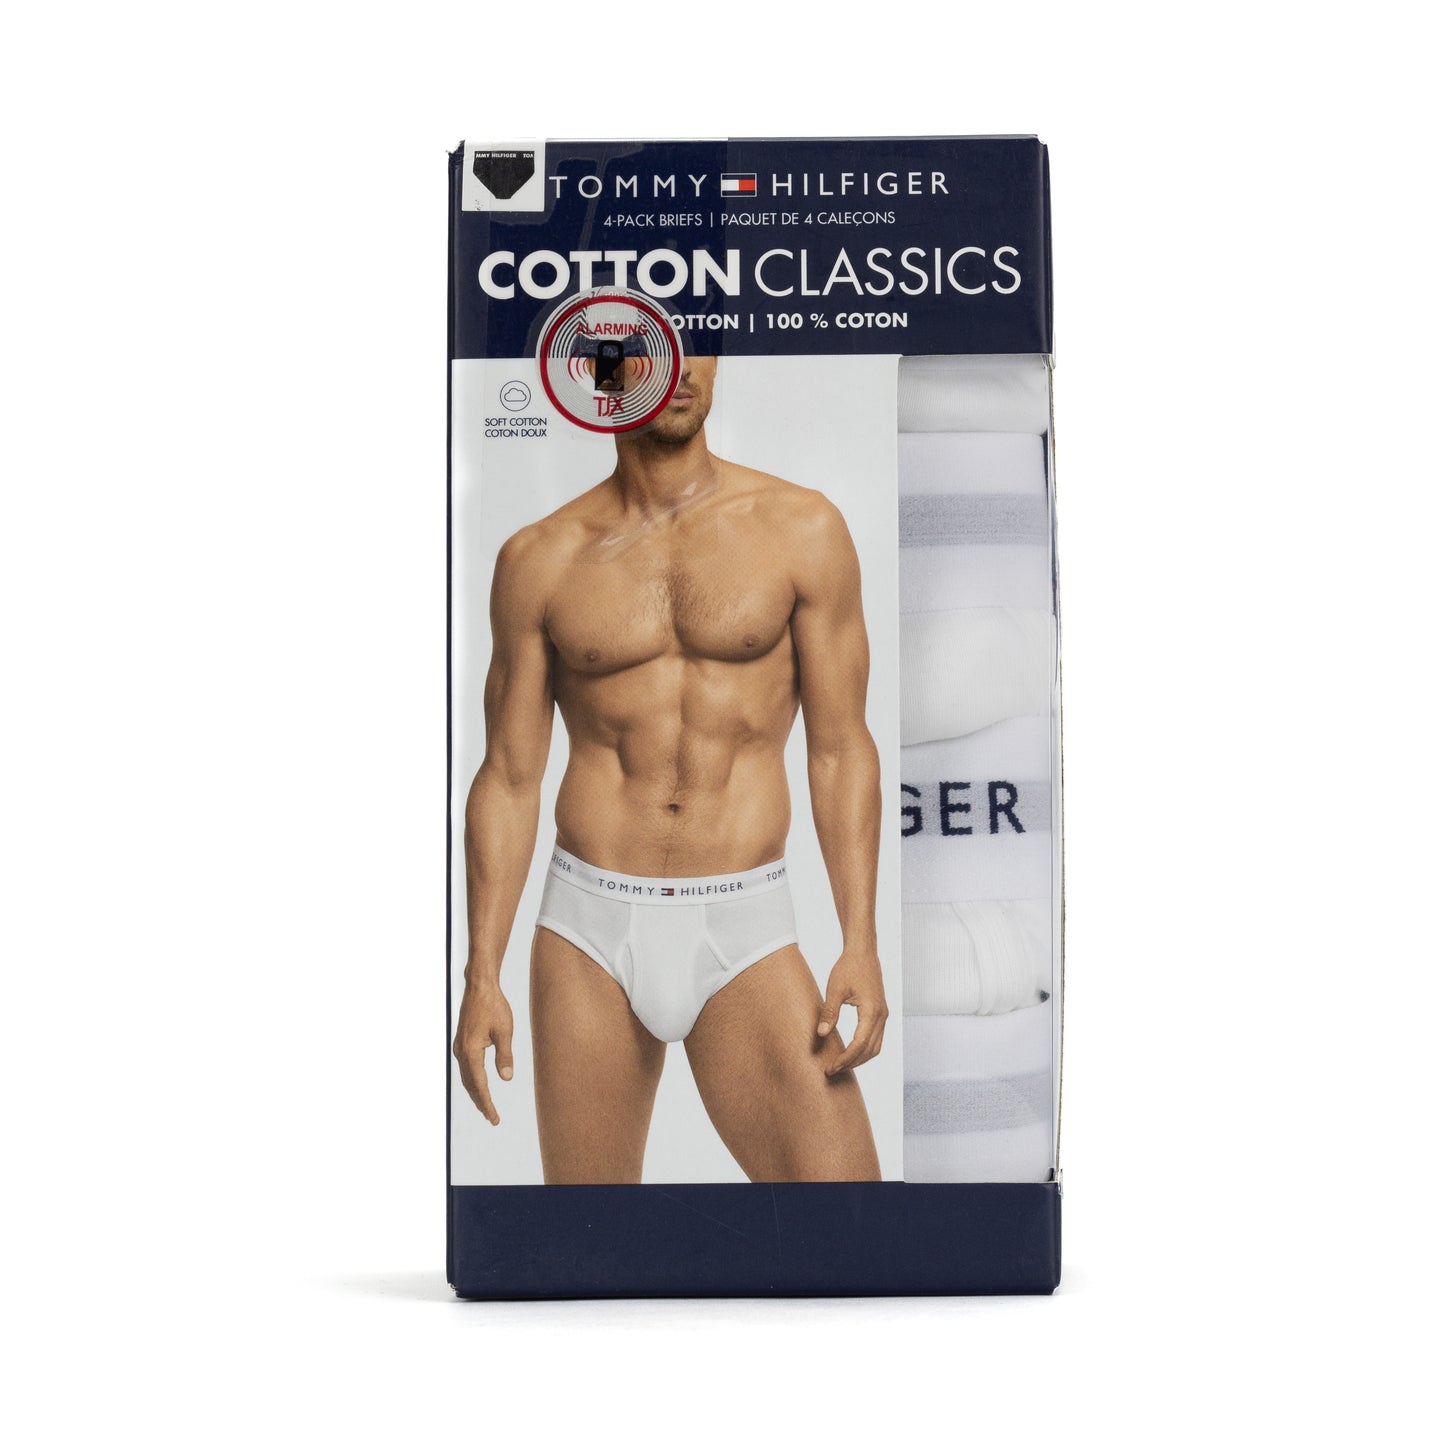 Tommy Hilfiger 4-Pack Briefs White Cotton Classics - Small